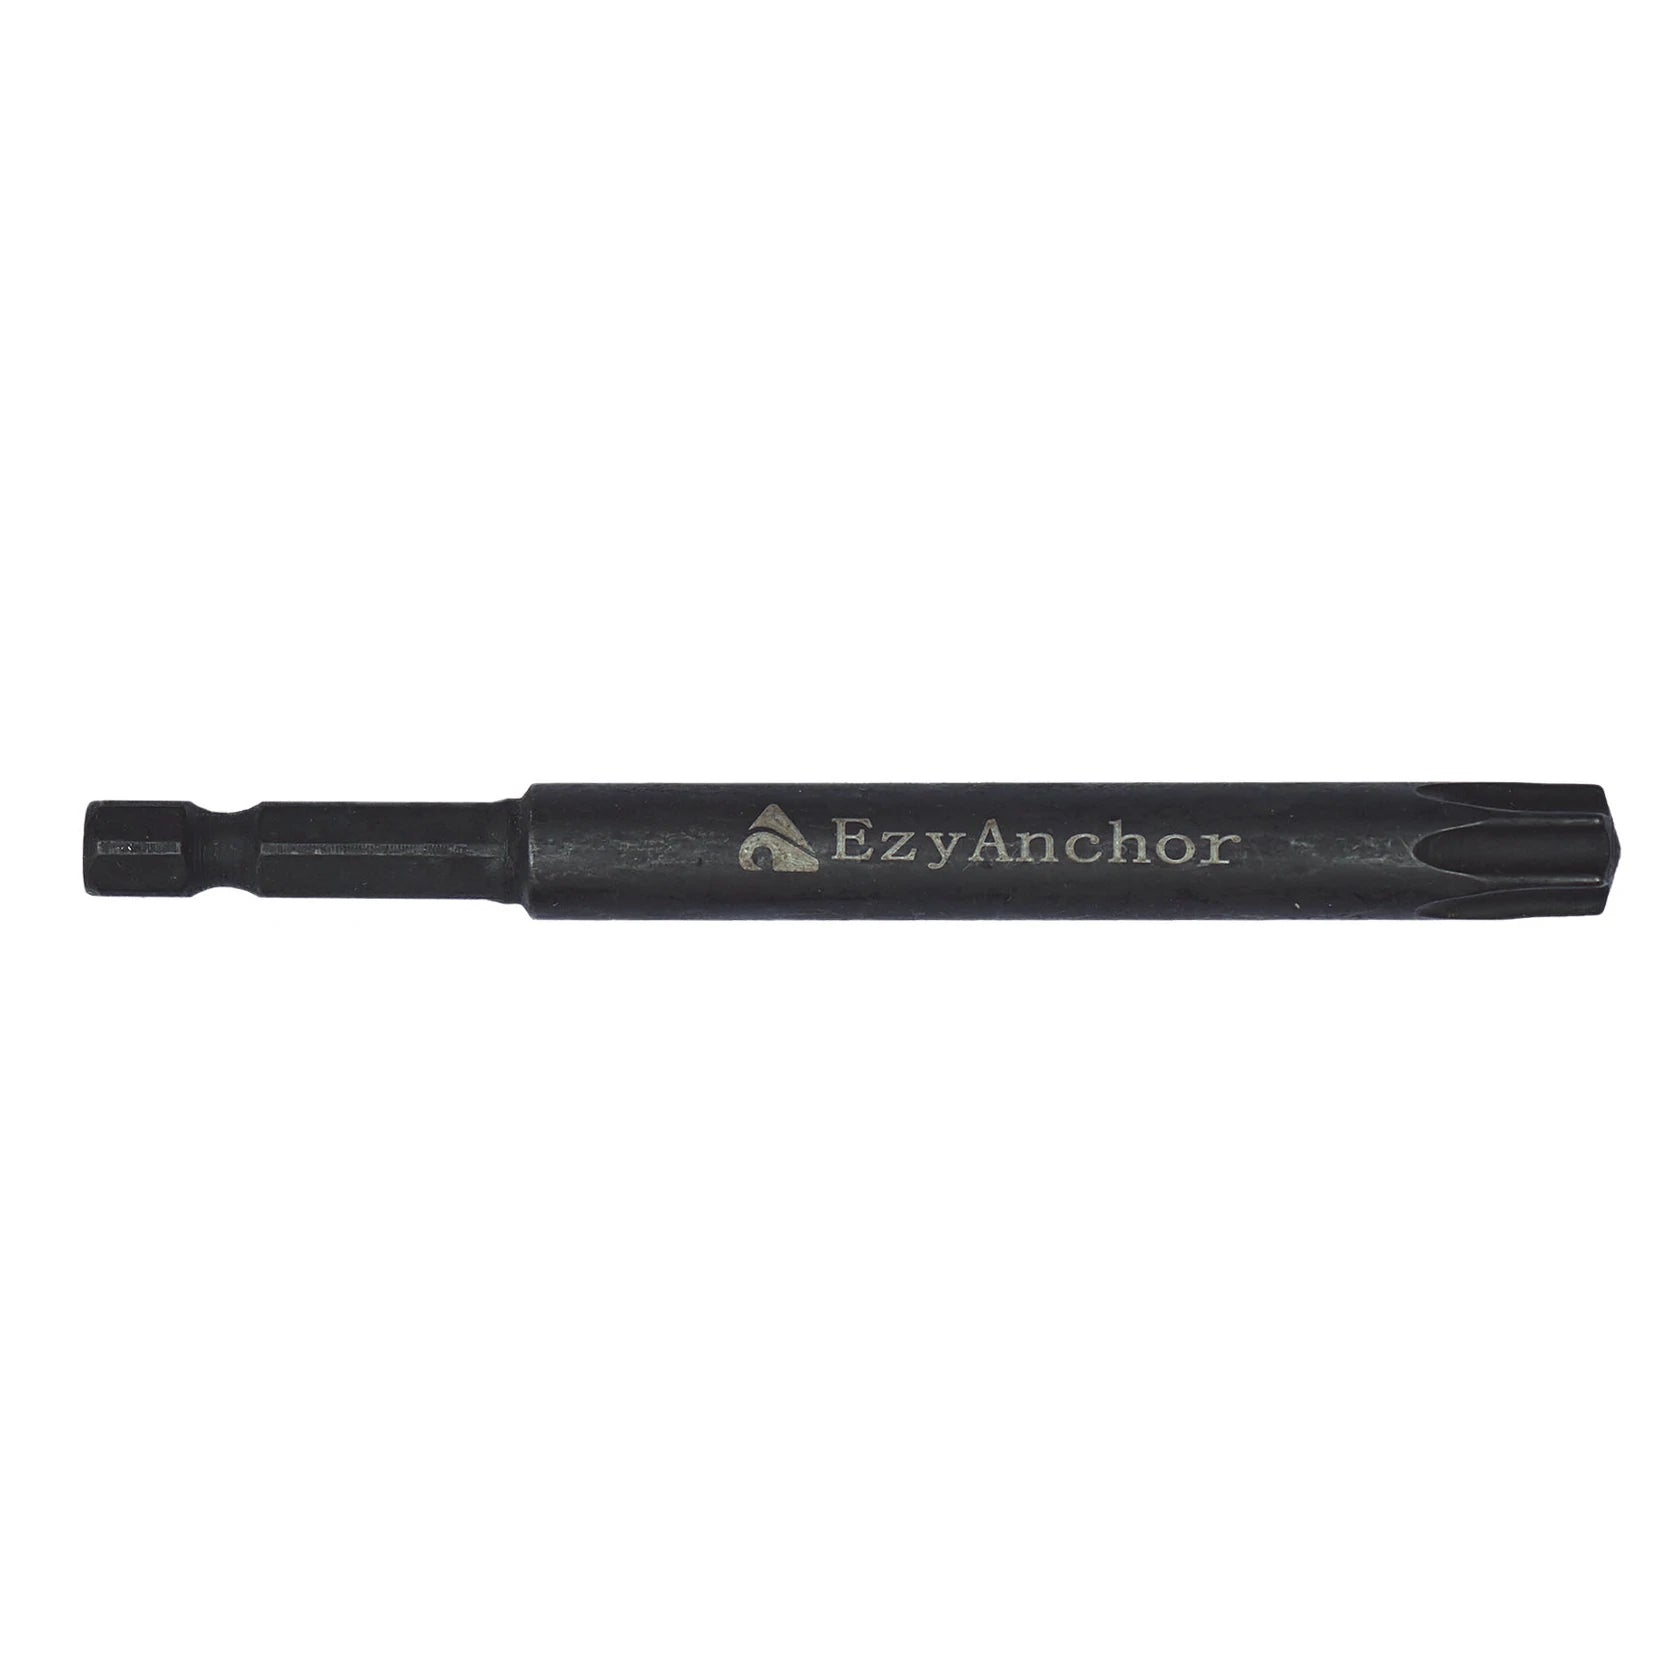 Ezy Anchor 4WD Awning Pack